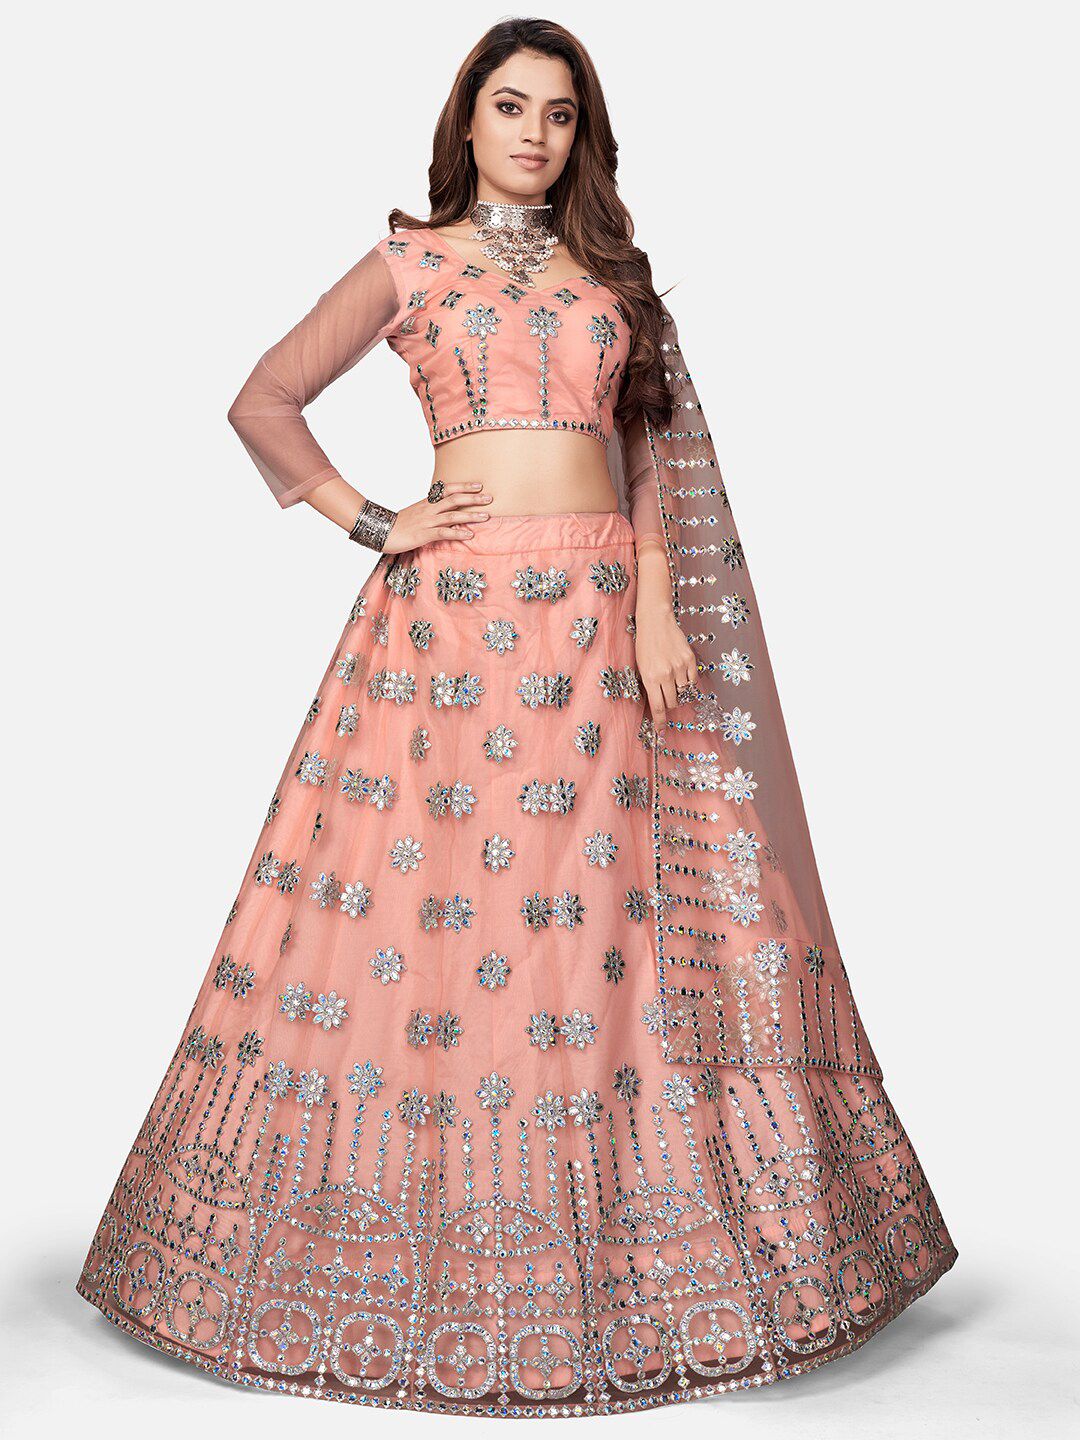 WHITE FIRE Peach-Coloured & Silver Embellished Semi-Stitched Lehenga & Unstitched Blouse Price in India